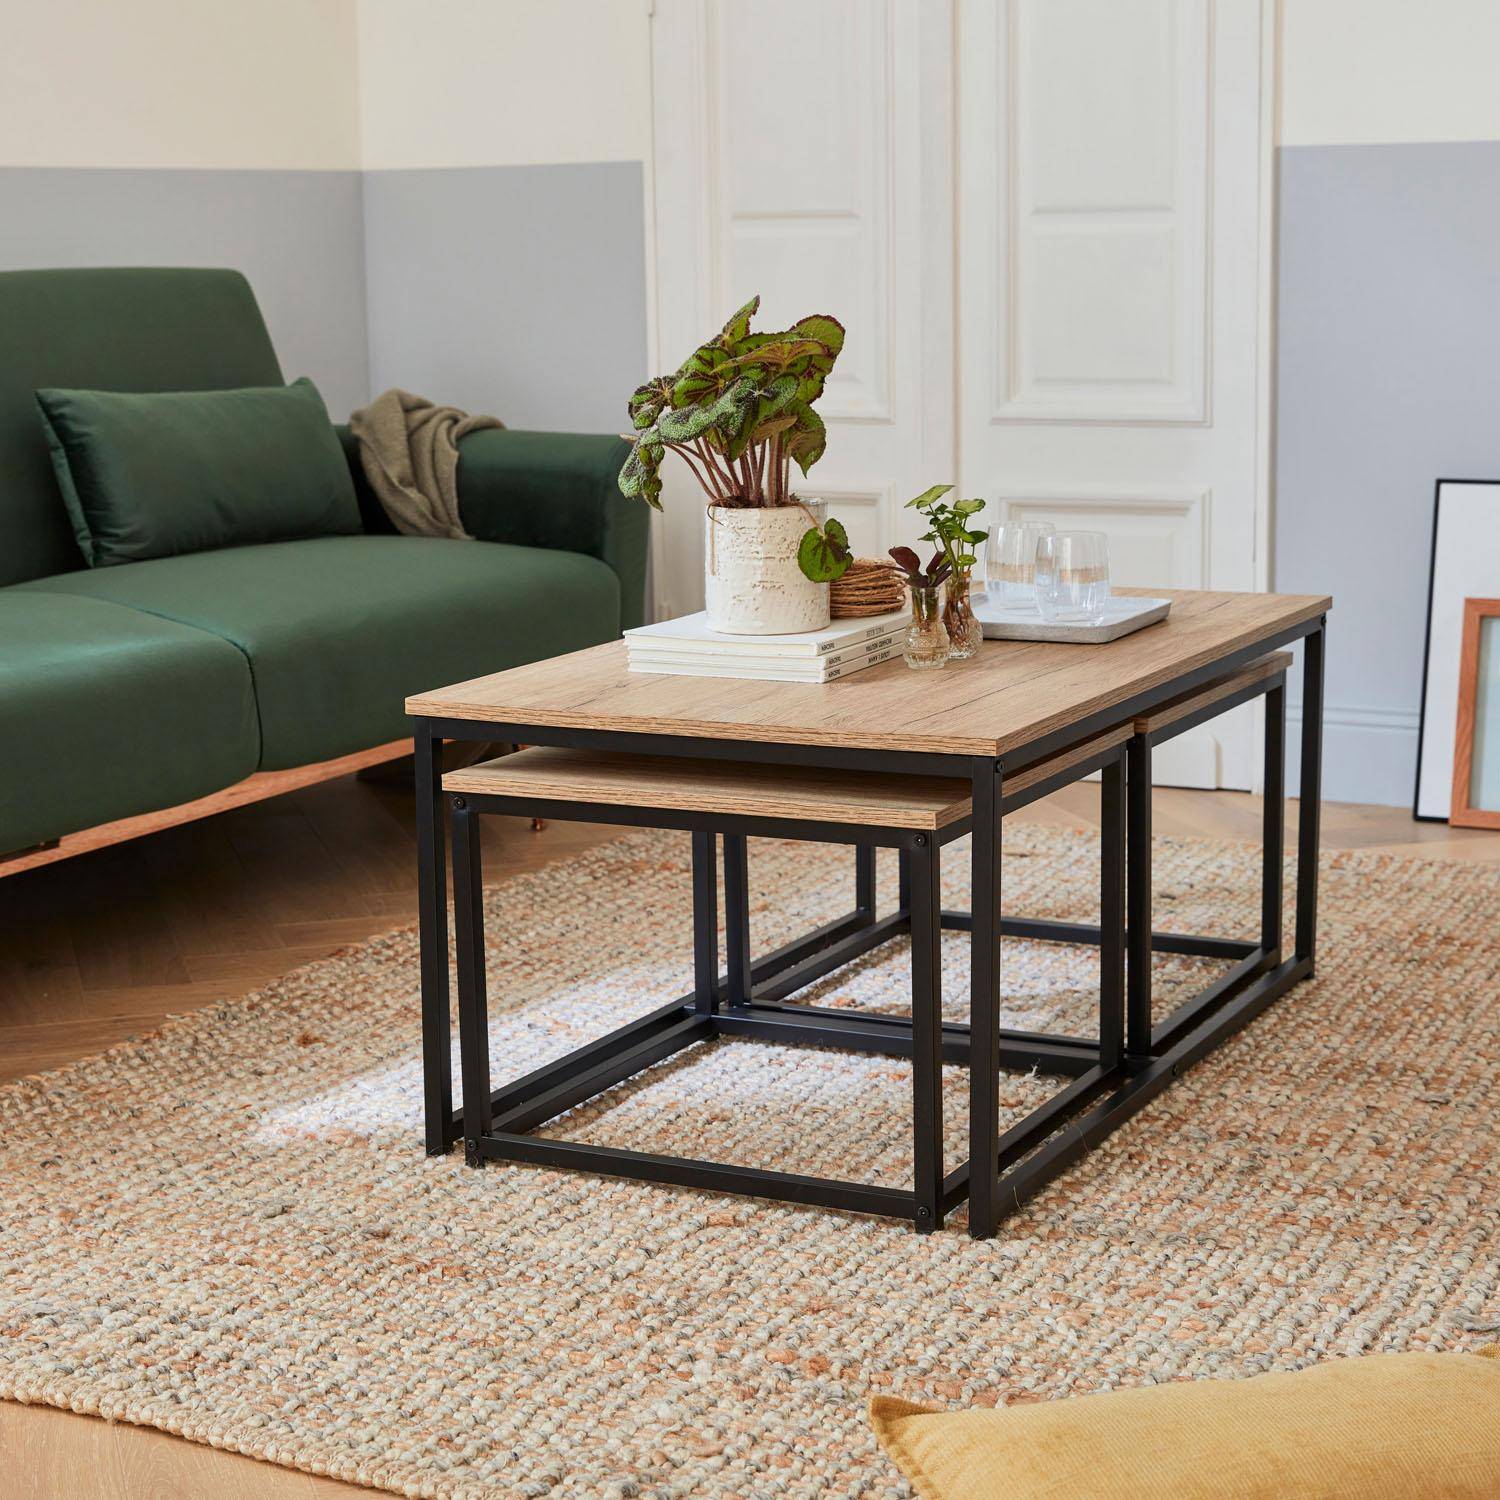 Set of 3 metal and wood-effect nesting tables, large table 100x60x45cm, 2x small tables 50x50x38cm - Loft - Black Photo2